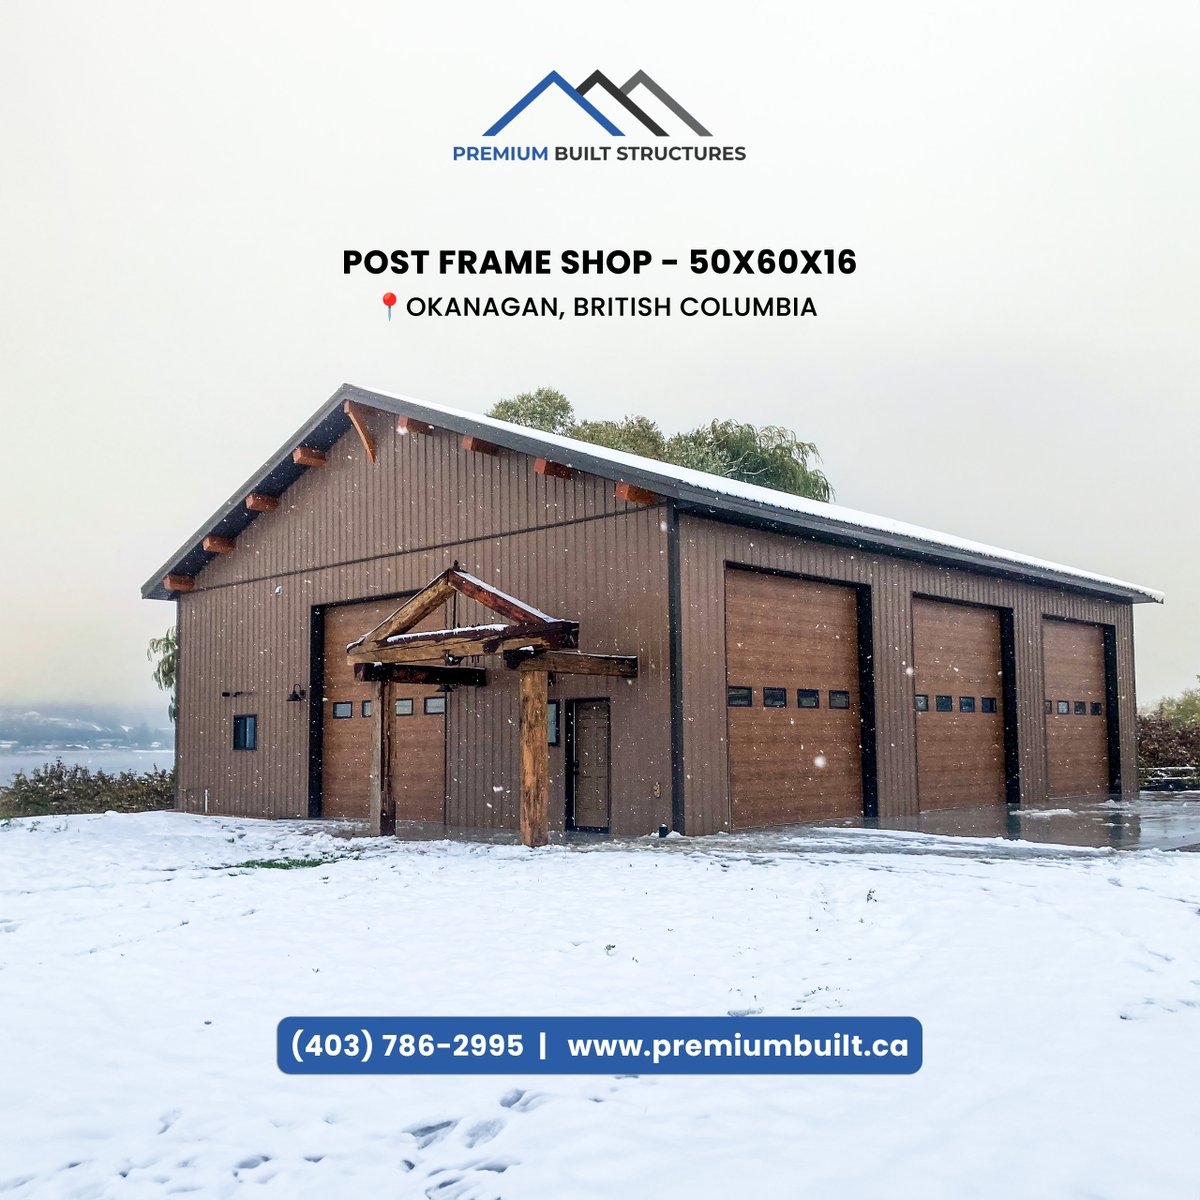 Check out this beautiful post frame shop built in the Okanagan! This 50x60 has 16' ceilings and comes with four overhead doors. Lots of room to work on your hobbies or for storage.

#PostFrameConstruction #OkanaganBuilt #ShopSpace #PremiumBuilt